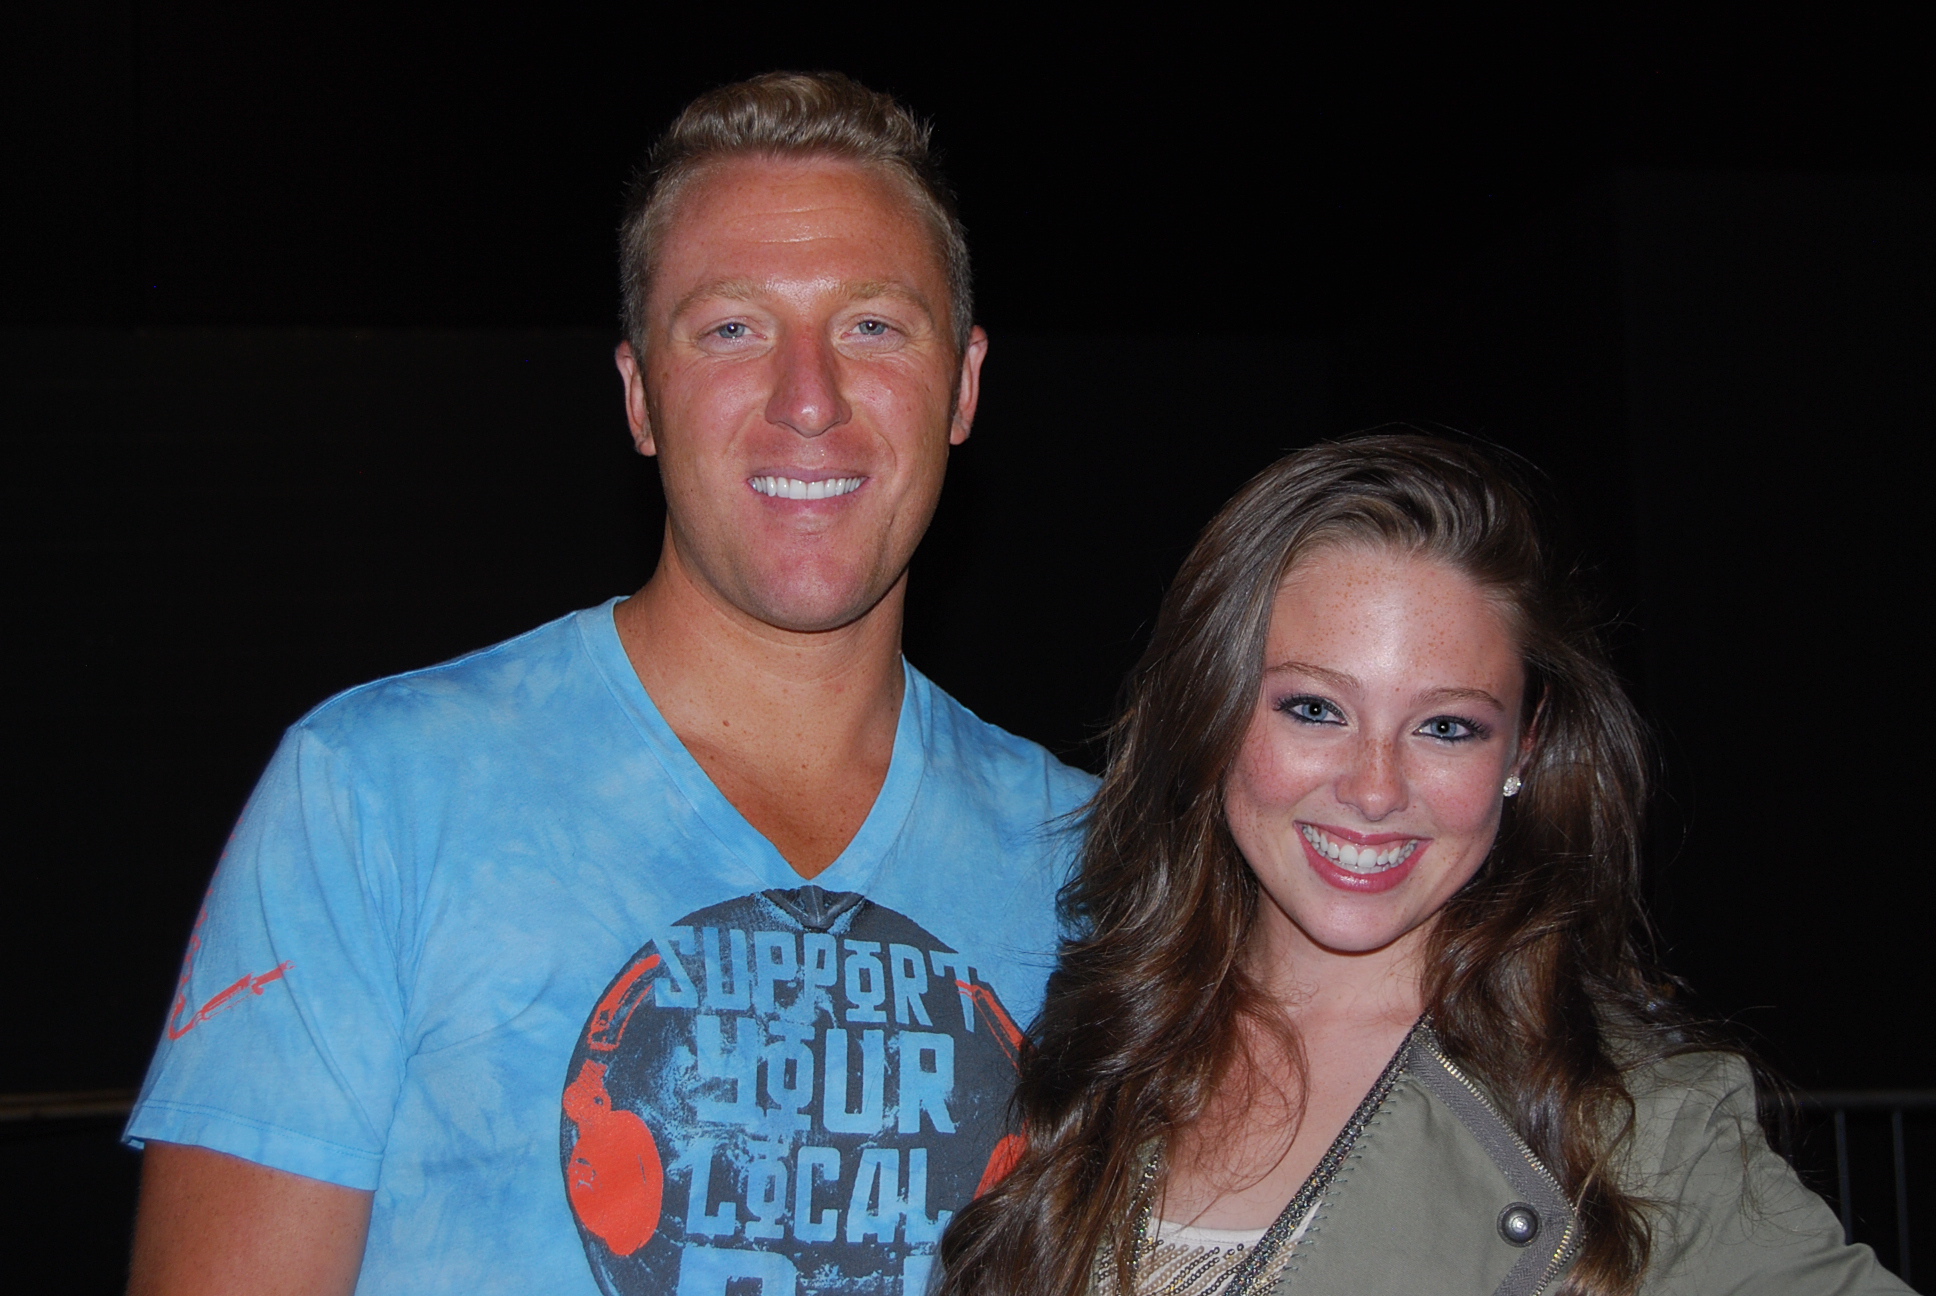 Sarah McMullen & Chuck Strouth backstage at the Cody Simpson/ Sarah McMullen concert in Wichita, KS